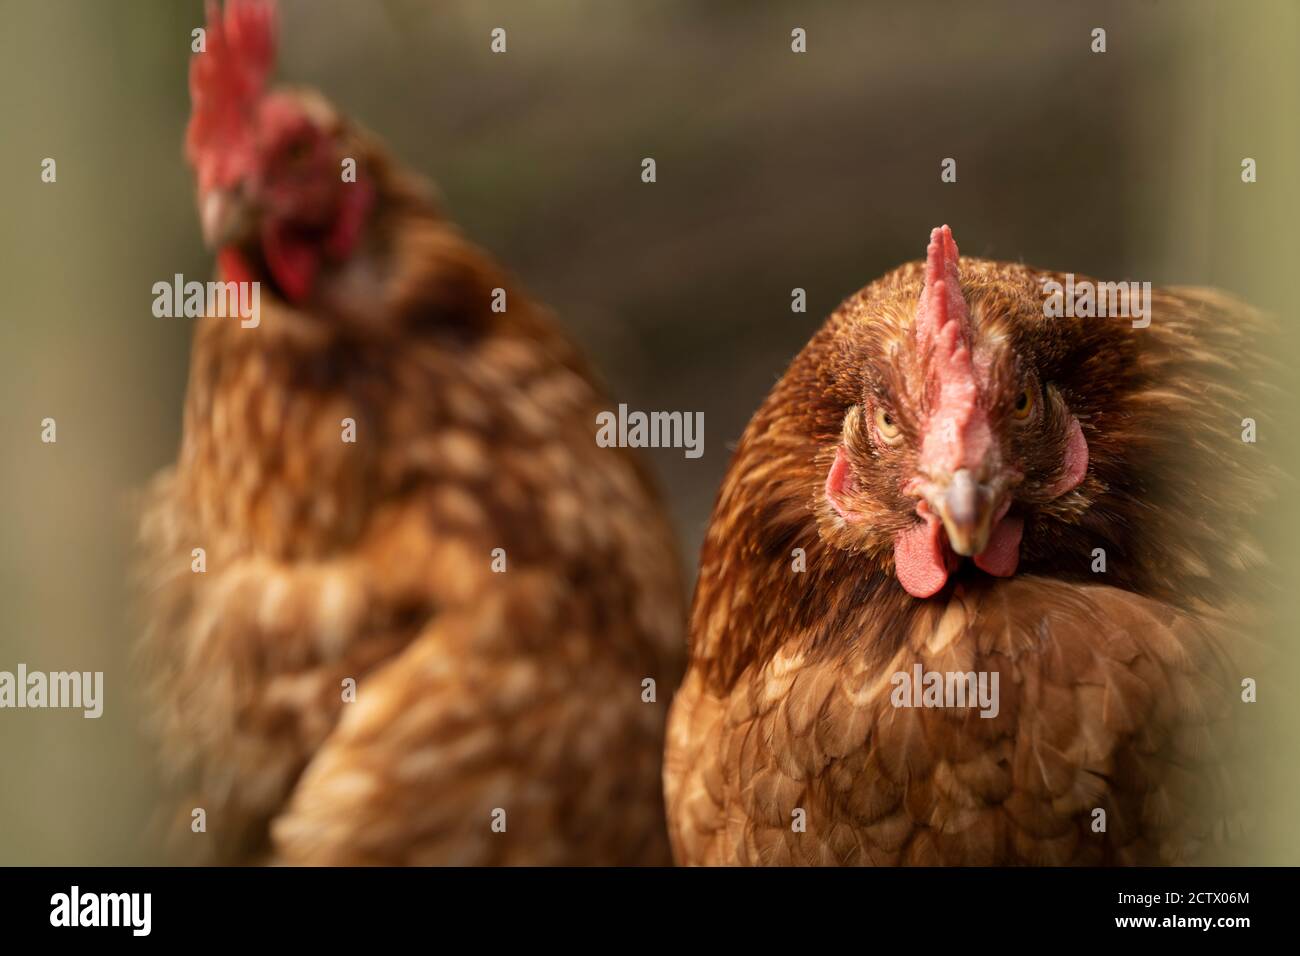 Hens inside an enclosure, Isles of Scilly. Stock Photo